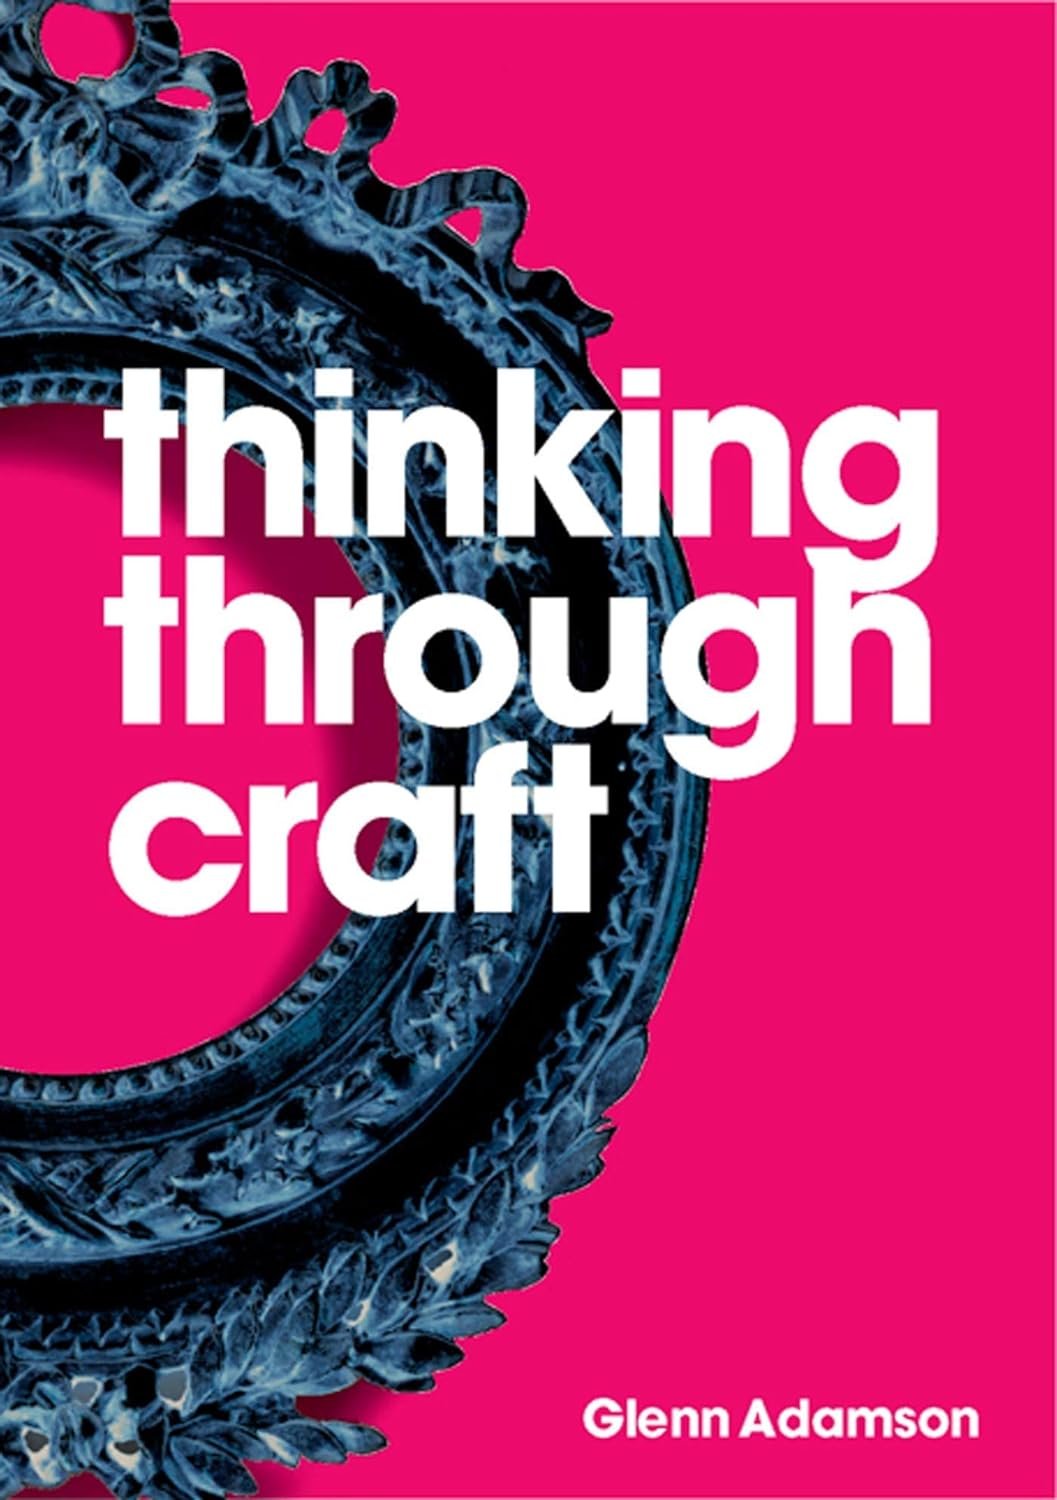 Cover of the product "Thinking Through Craft" by Glenn Adamson, featuring bold white text on a bright pink background with a black ornate circular frame at the top, exploring concepts in contemporary art and.